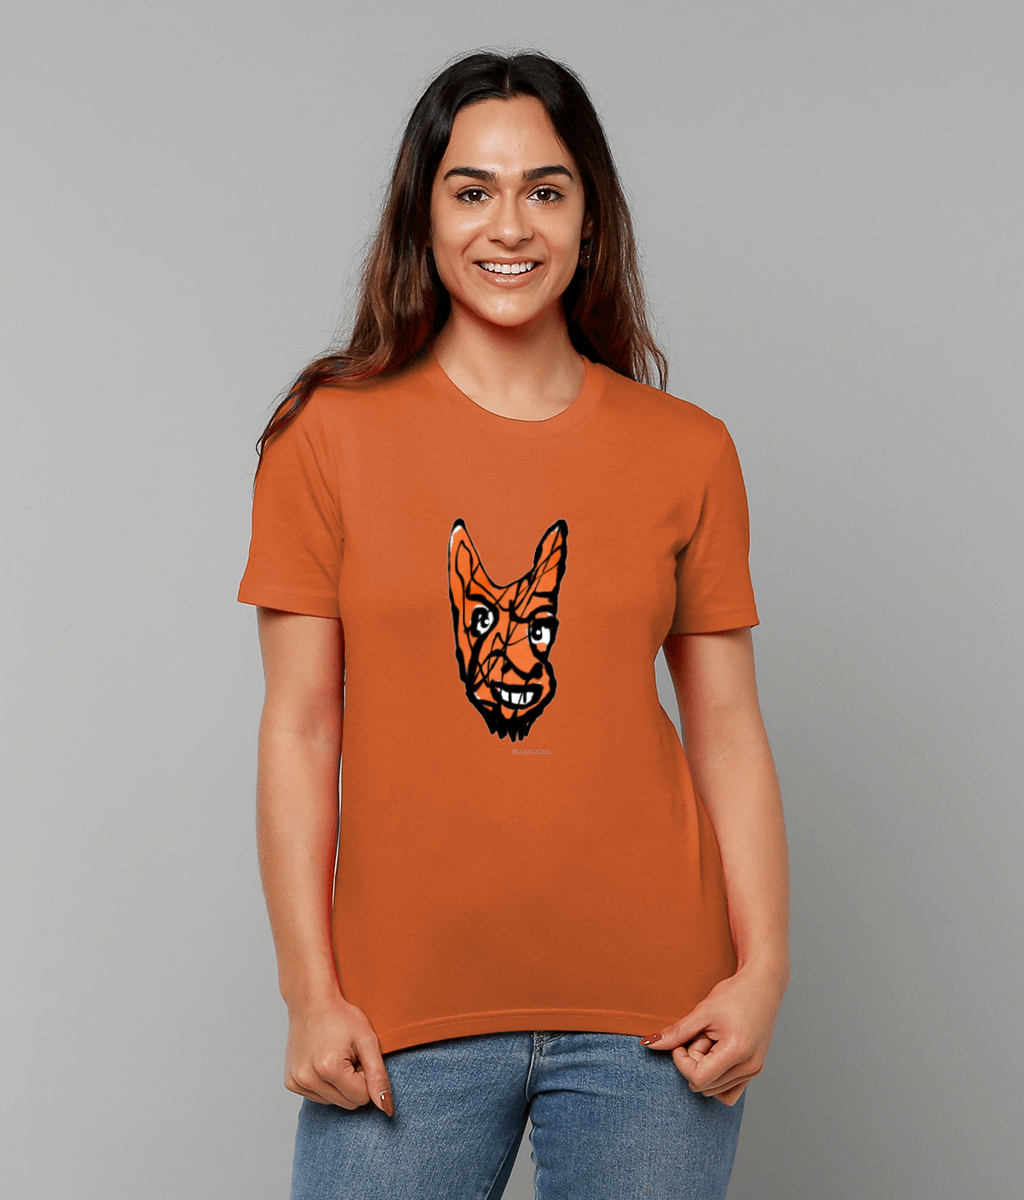 Devil T-shirt - Young woman wearing Cheeky Little Devil illustrated orange vegan cotton t-shirts by Hector and Bone